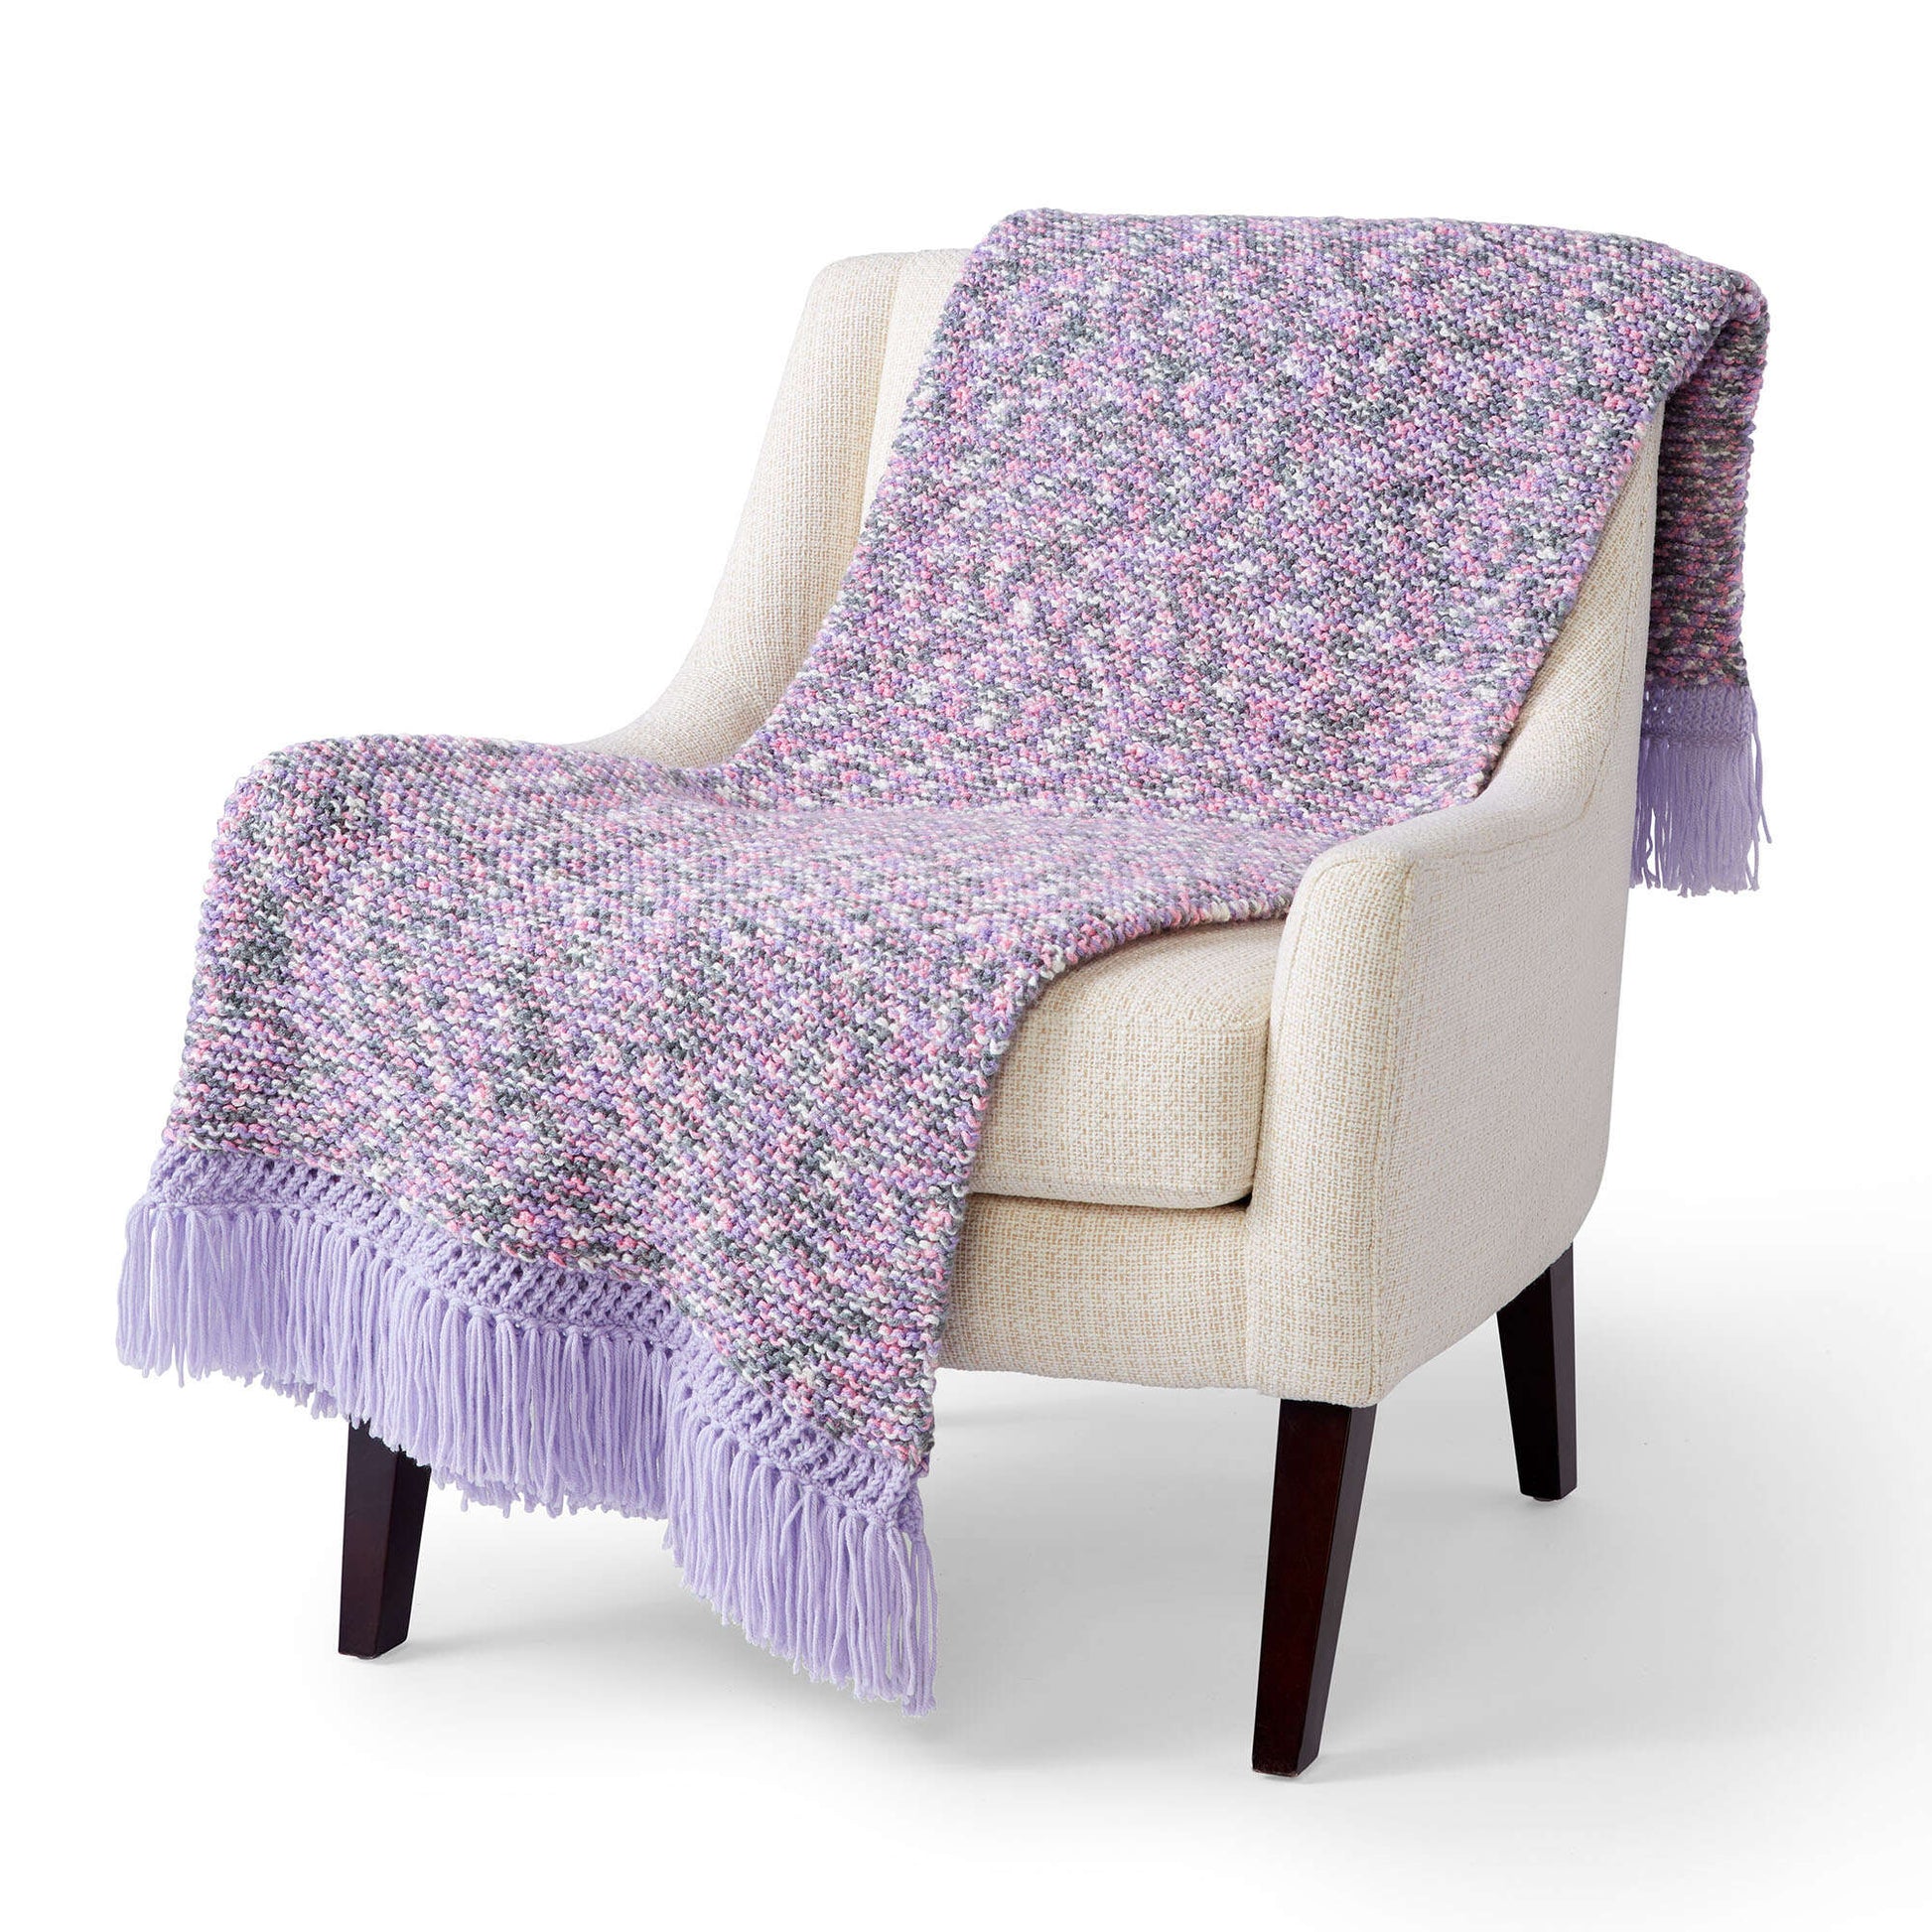 Free Caron Trimmed With Love Knit Blanket Pattern